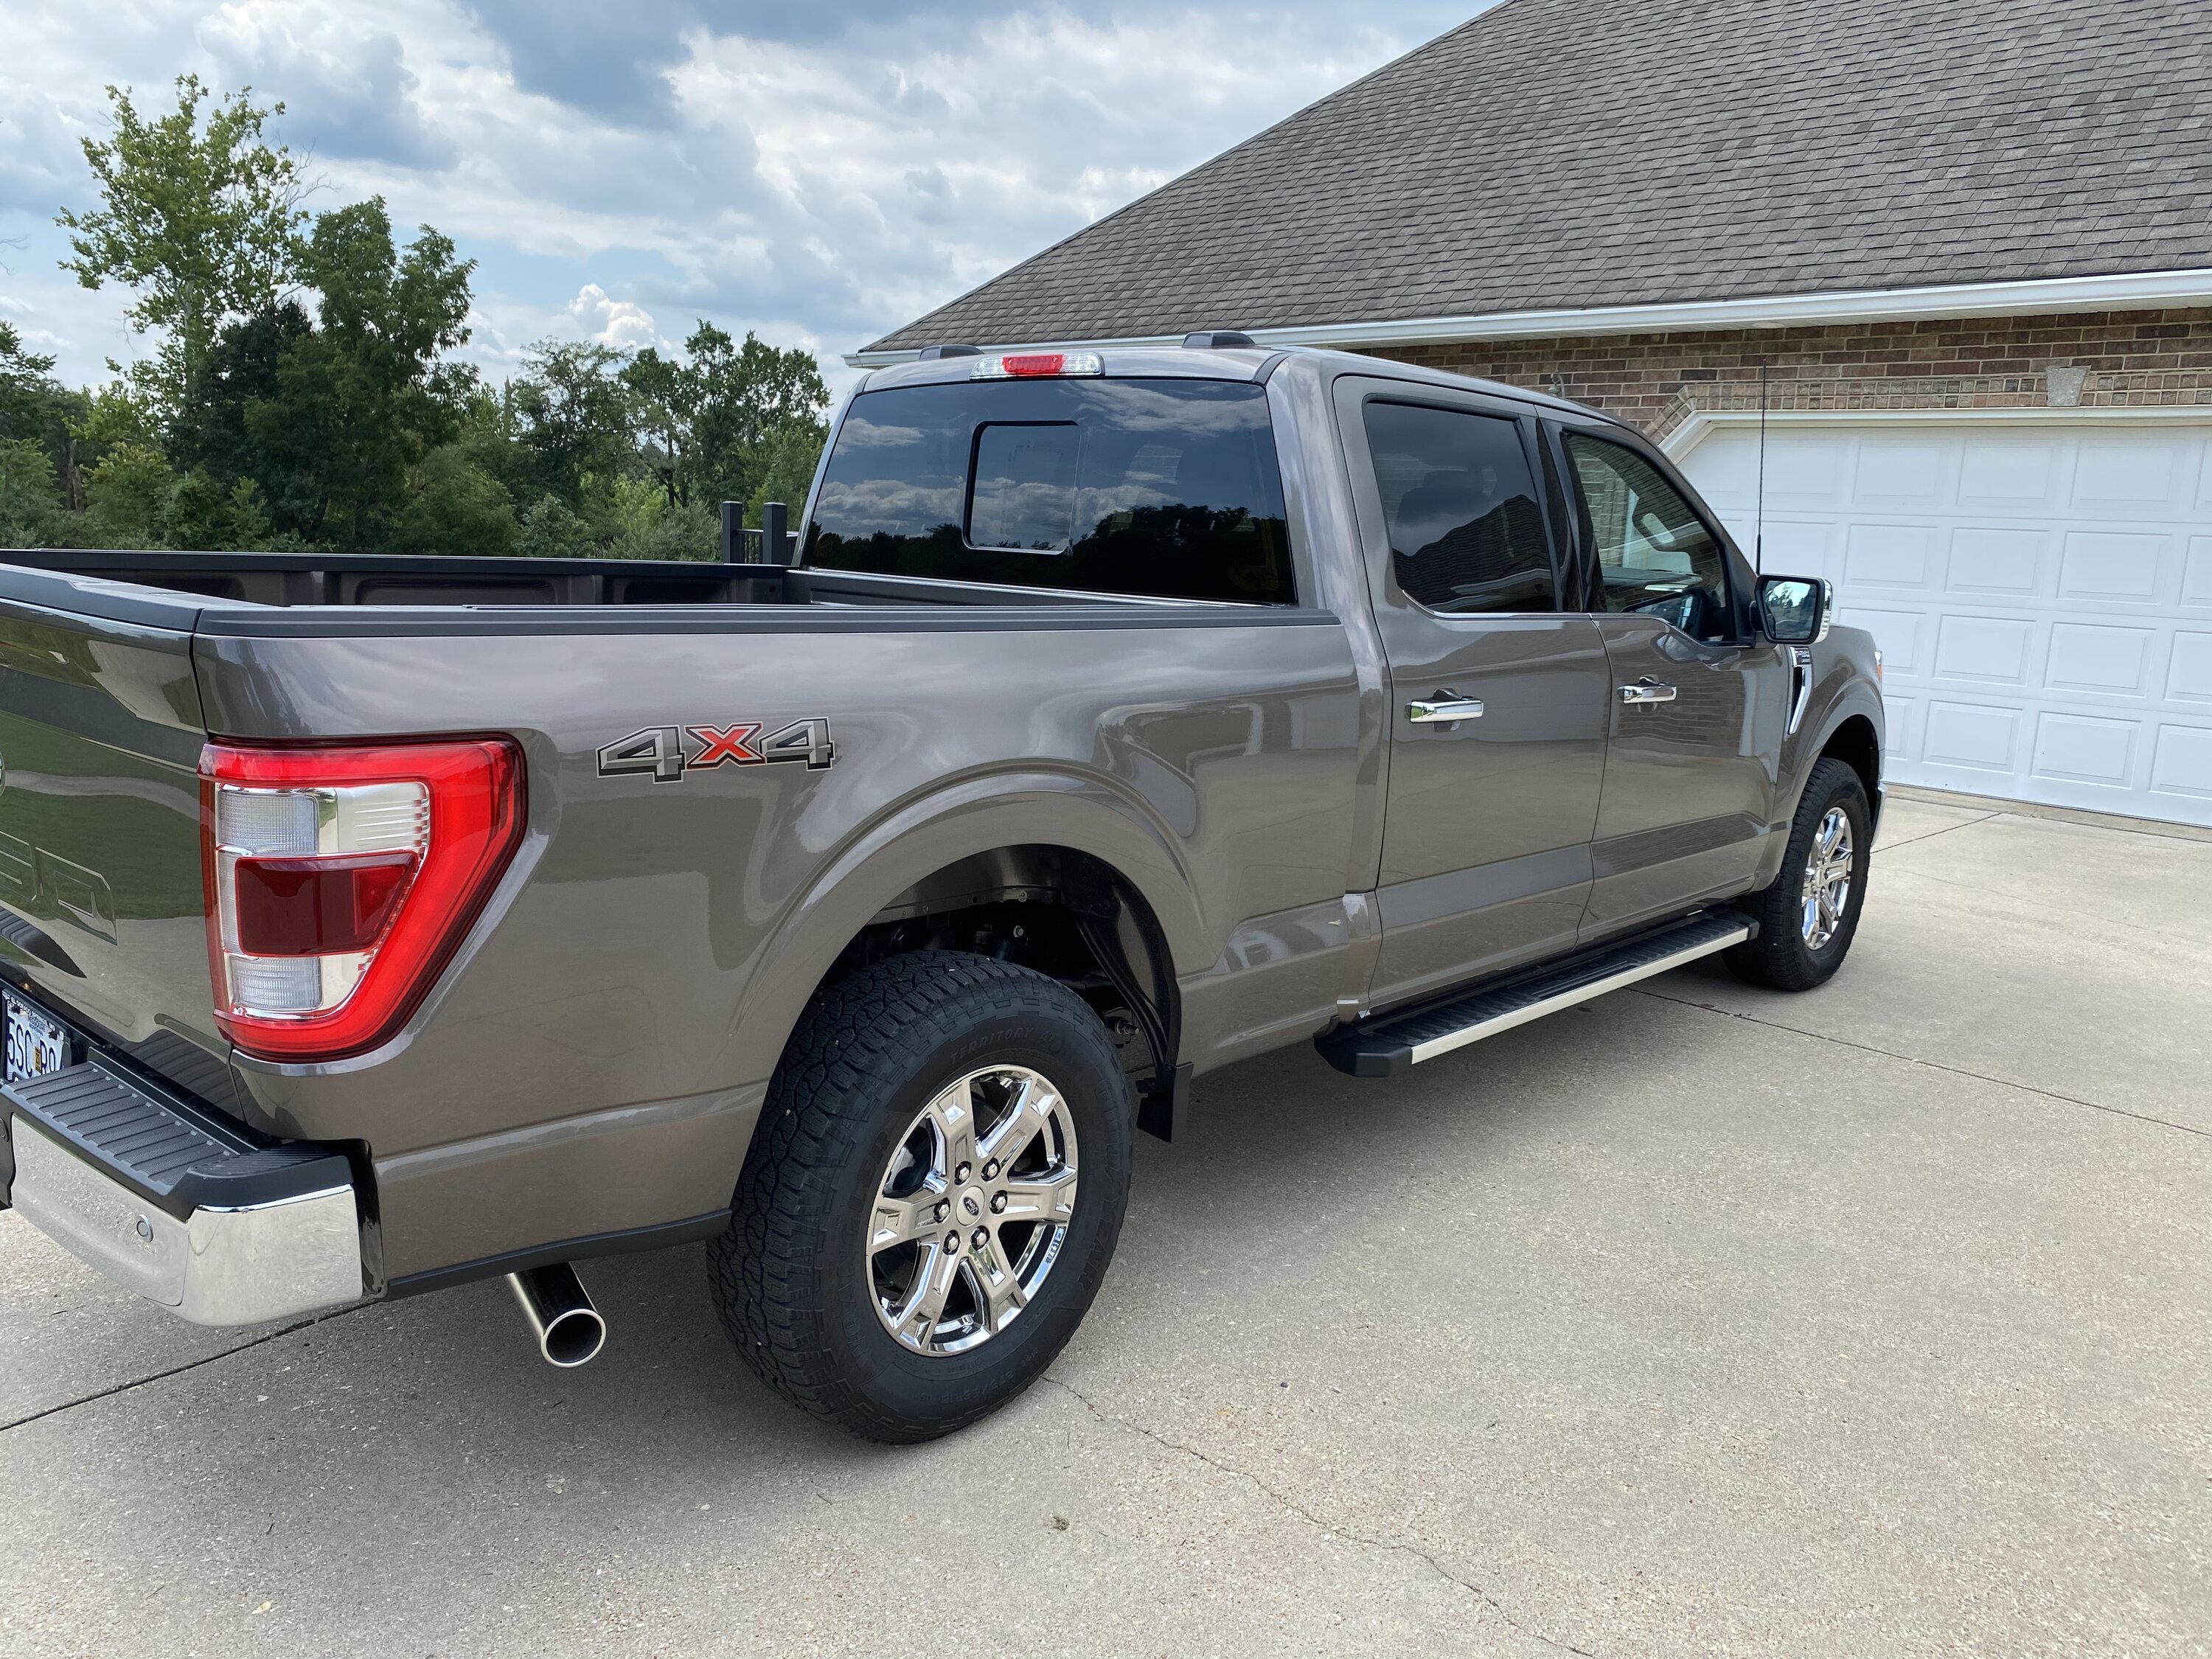 Ford F-150 Let’s see your 2021+ long-bed Supercrews (157” wheelbase) 88235F32-4D23-4901-BC26-DF3287403DB1